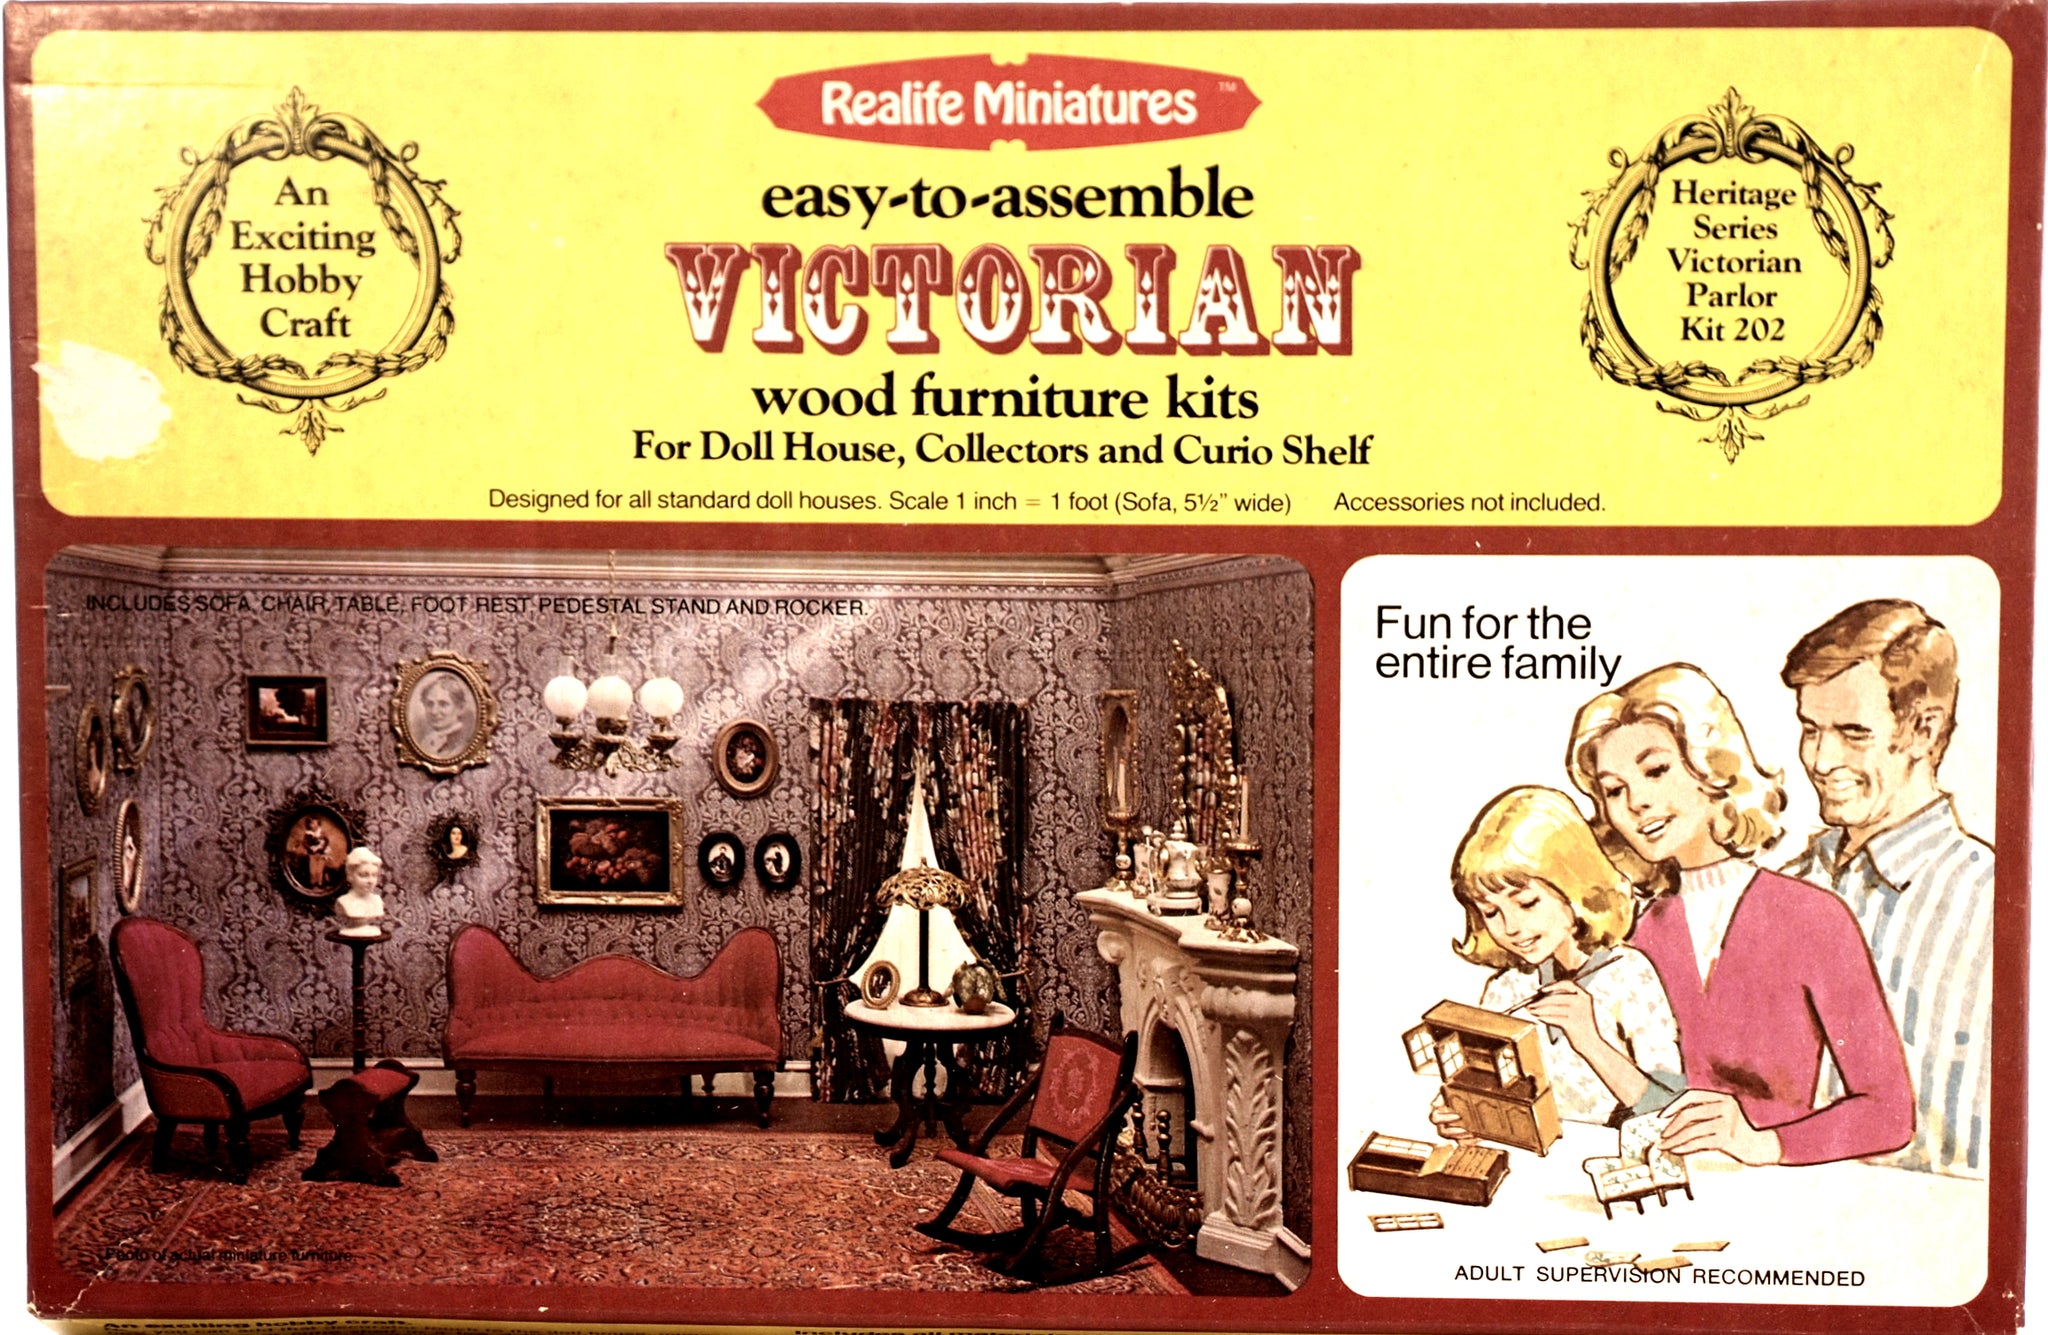 Realife Miniature Furniture Kit # 202 Victorian Series Parlor DIY Dollhouse by Scientific Models Miniatures